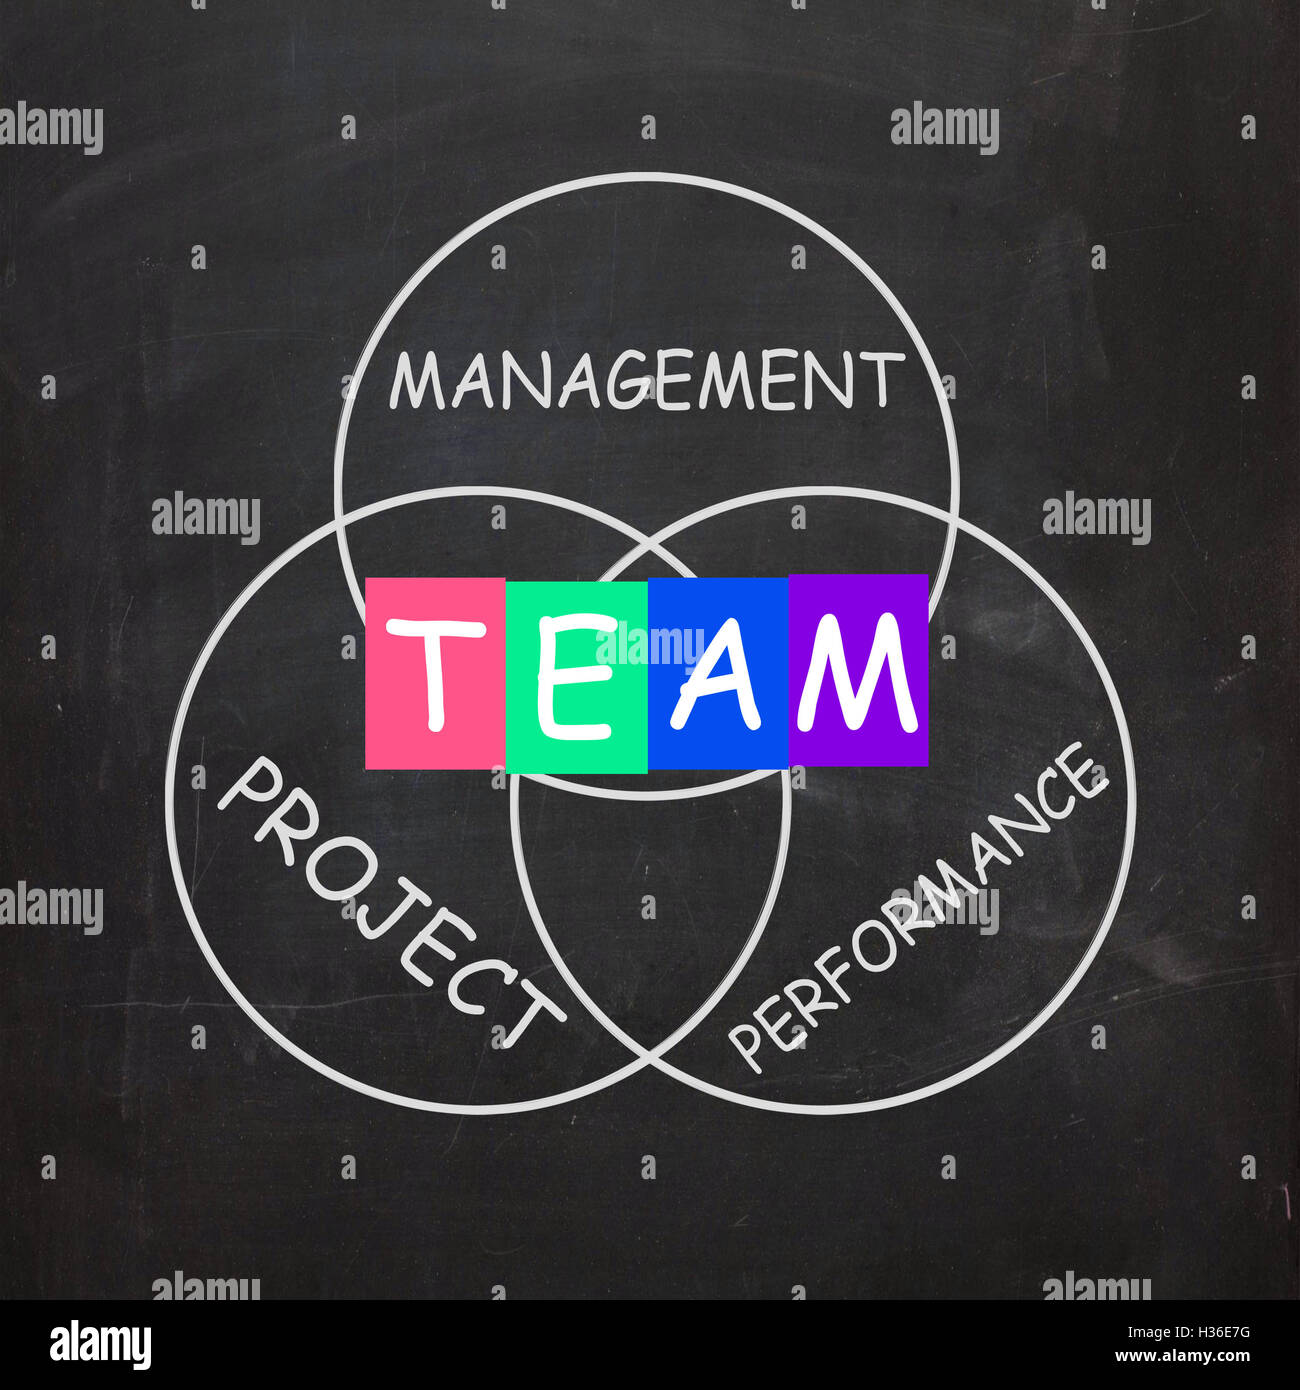 Words Refer to Team Management Project Performance Stock Photo